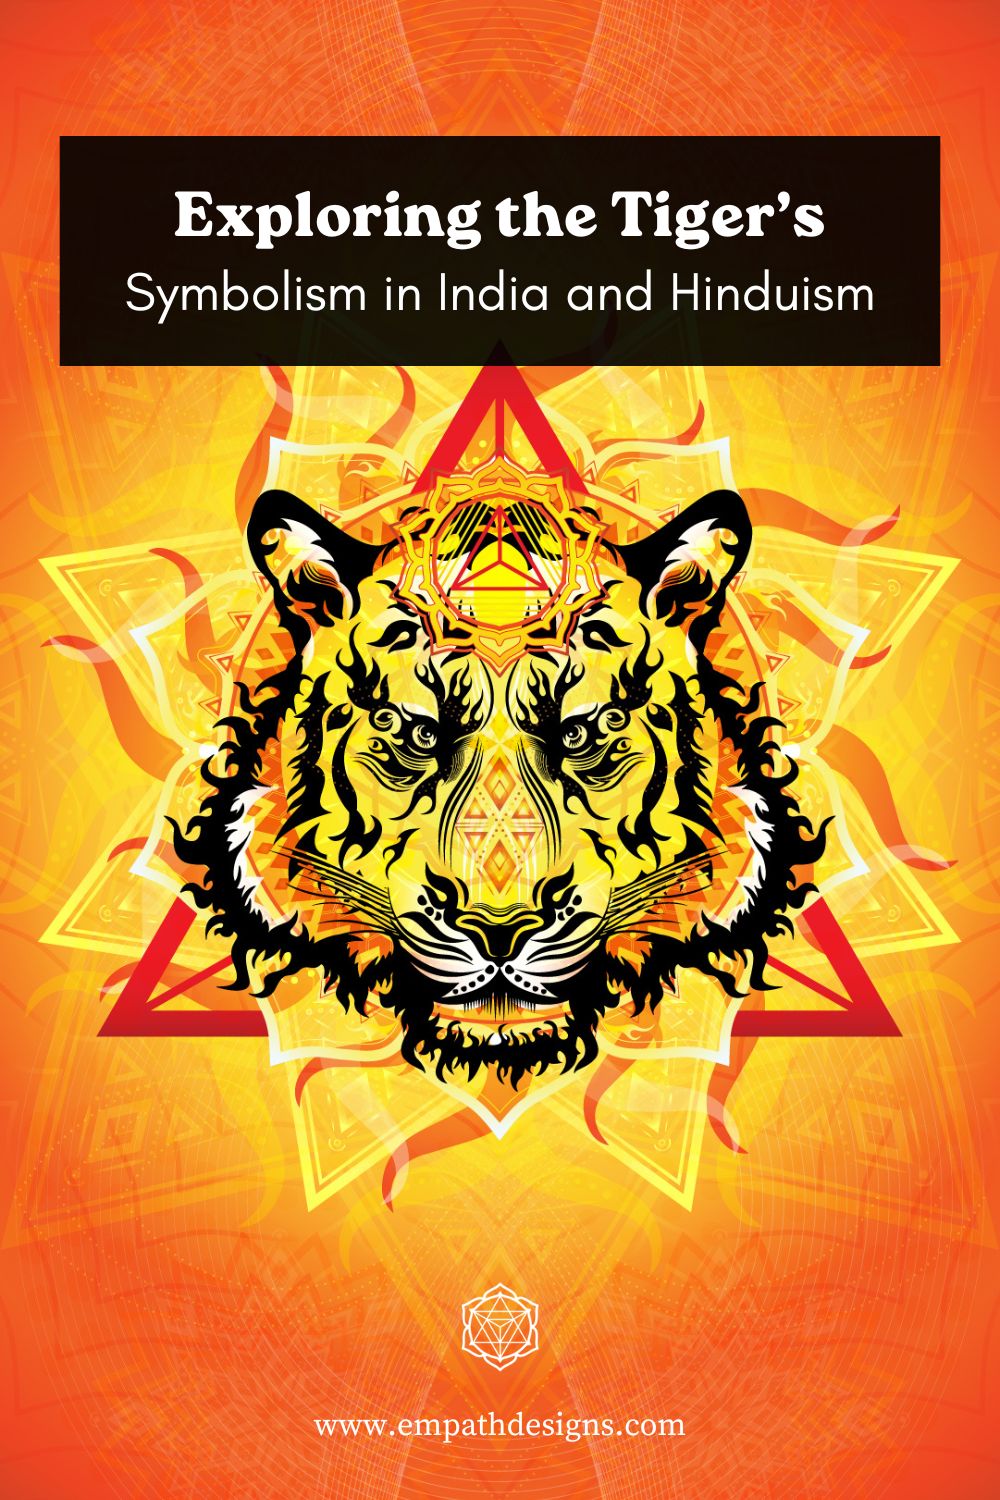 Exploring the Tiger’s Symbolism in India and Hinduism